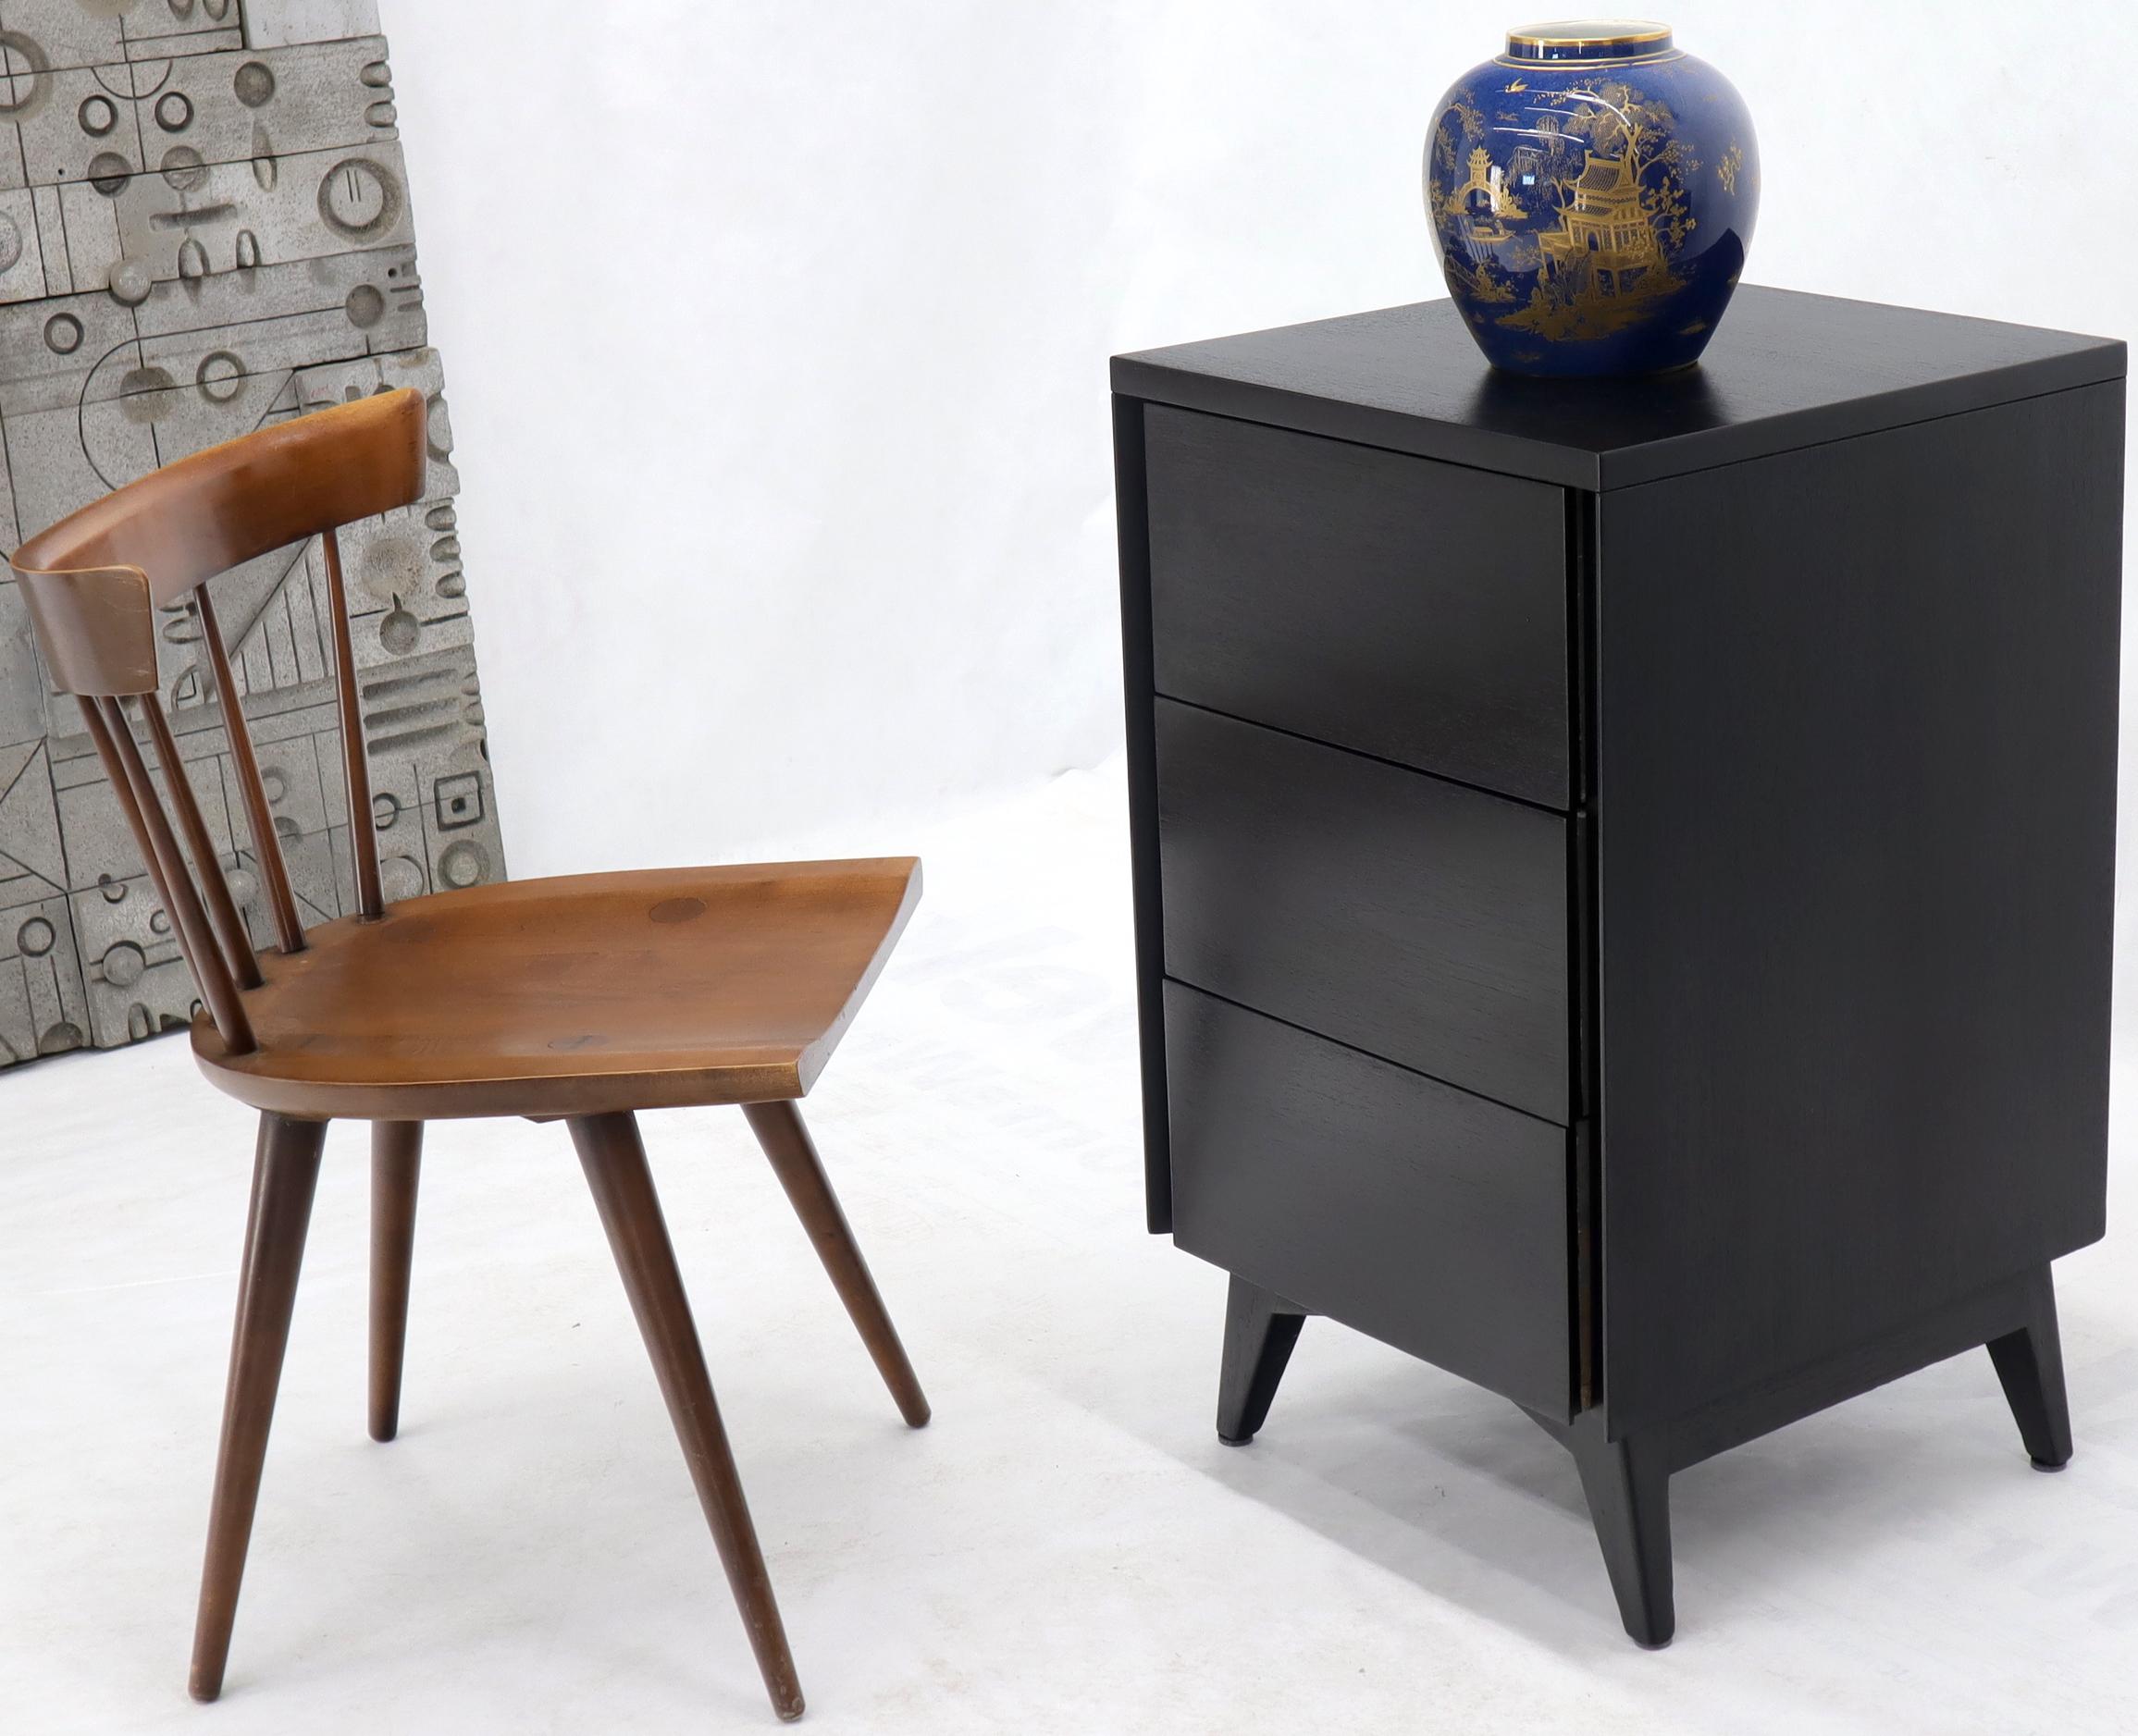 Pair of Mid-Century Modern black lacquer three drawers large end tables or bachelor chests or drawers by John Stuart.